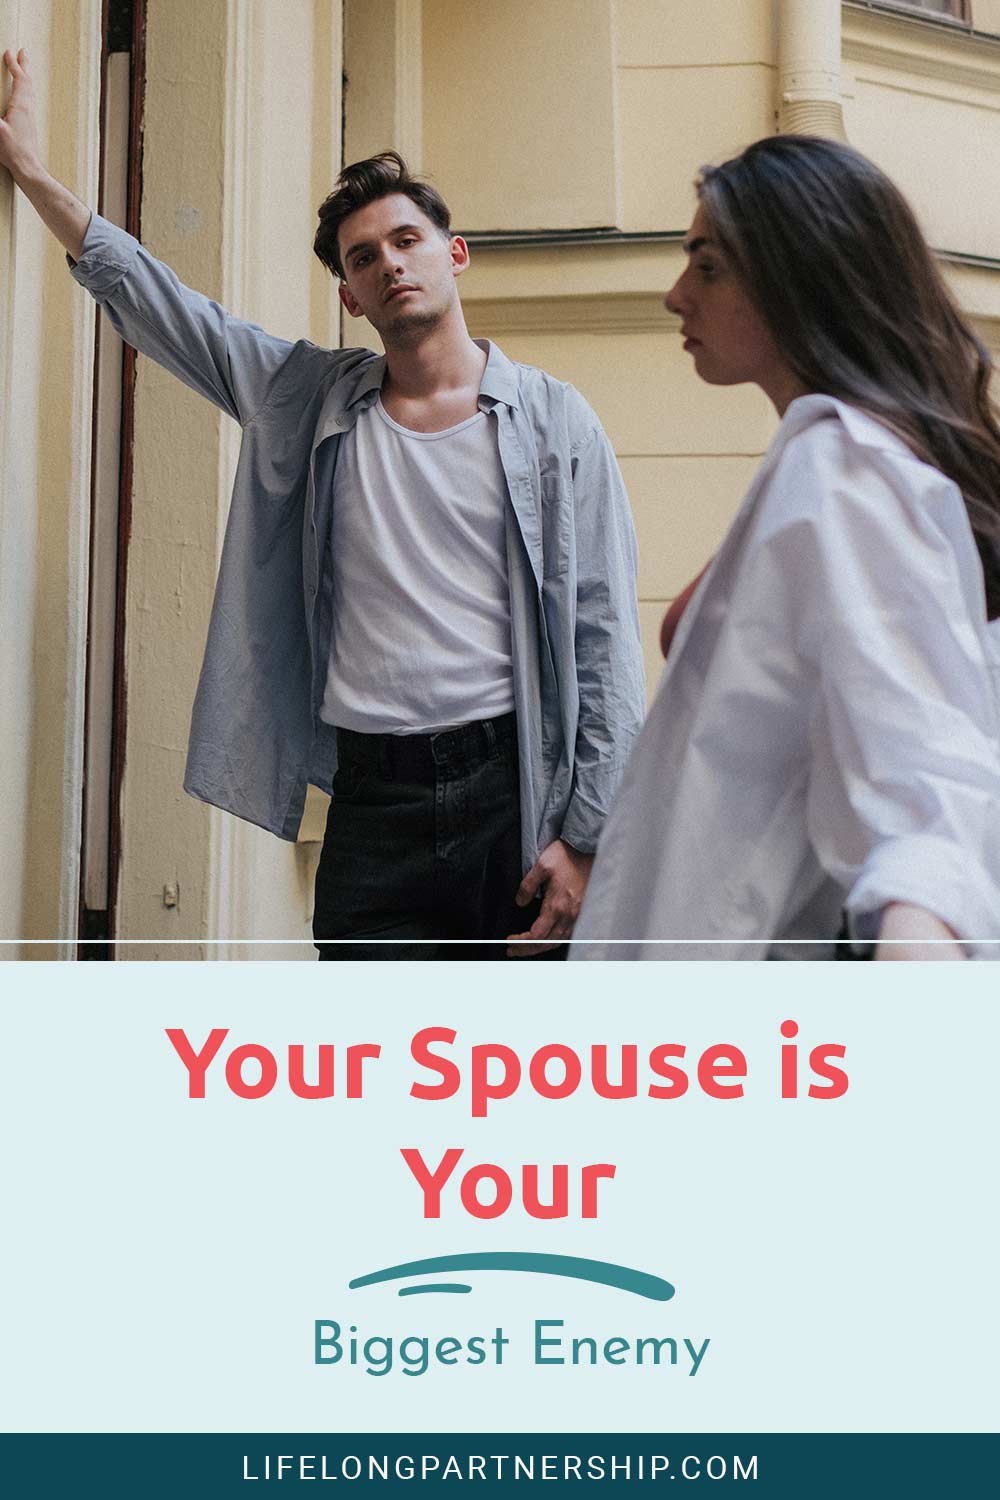 Man and woman just had an argument - Your Spouse is Your Biggest Enemy.